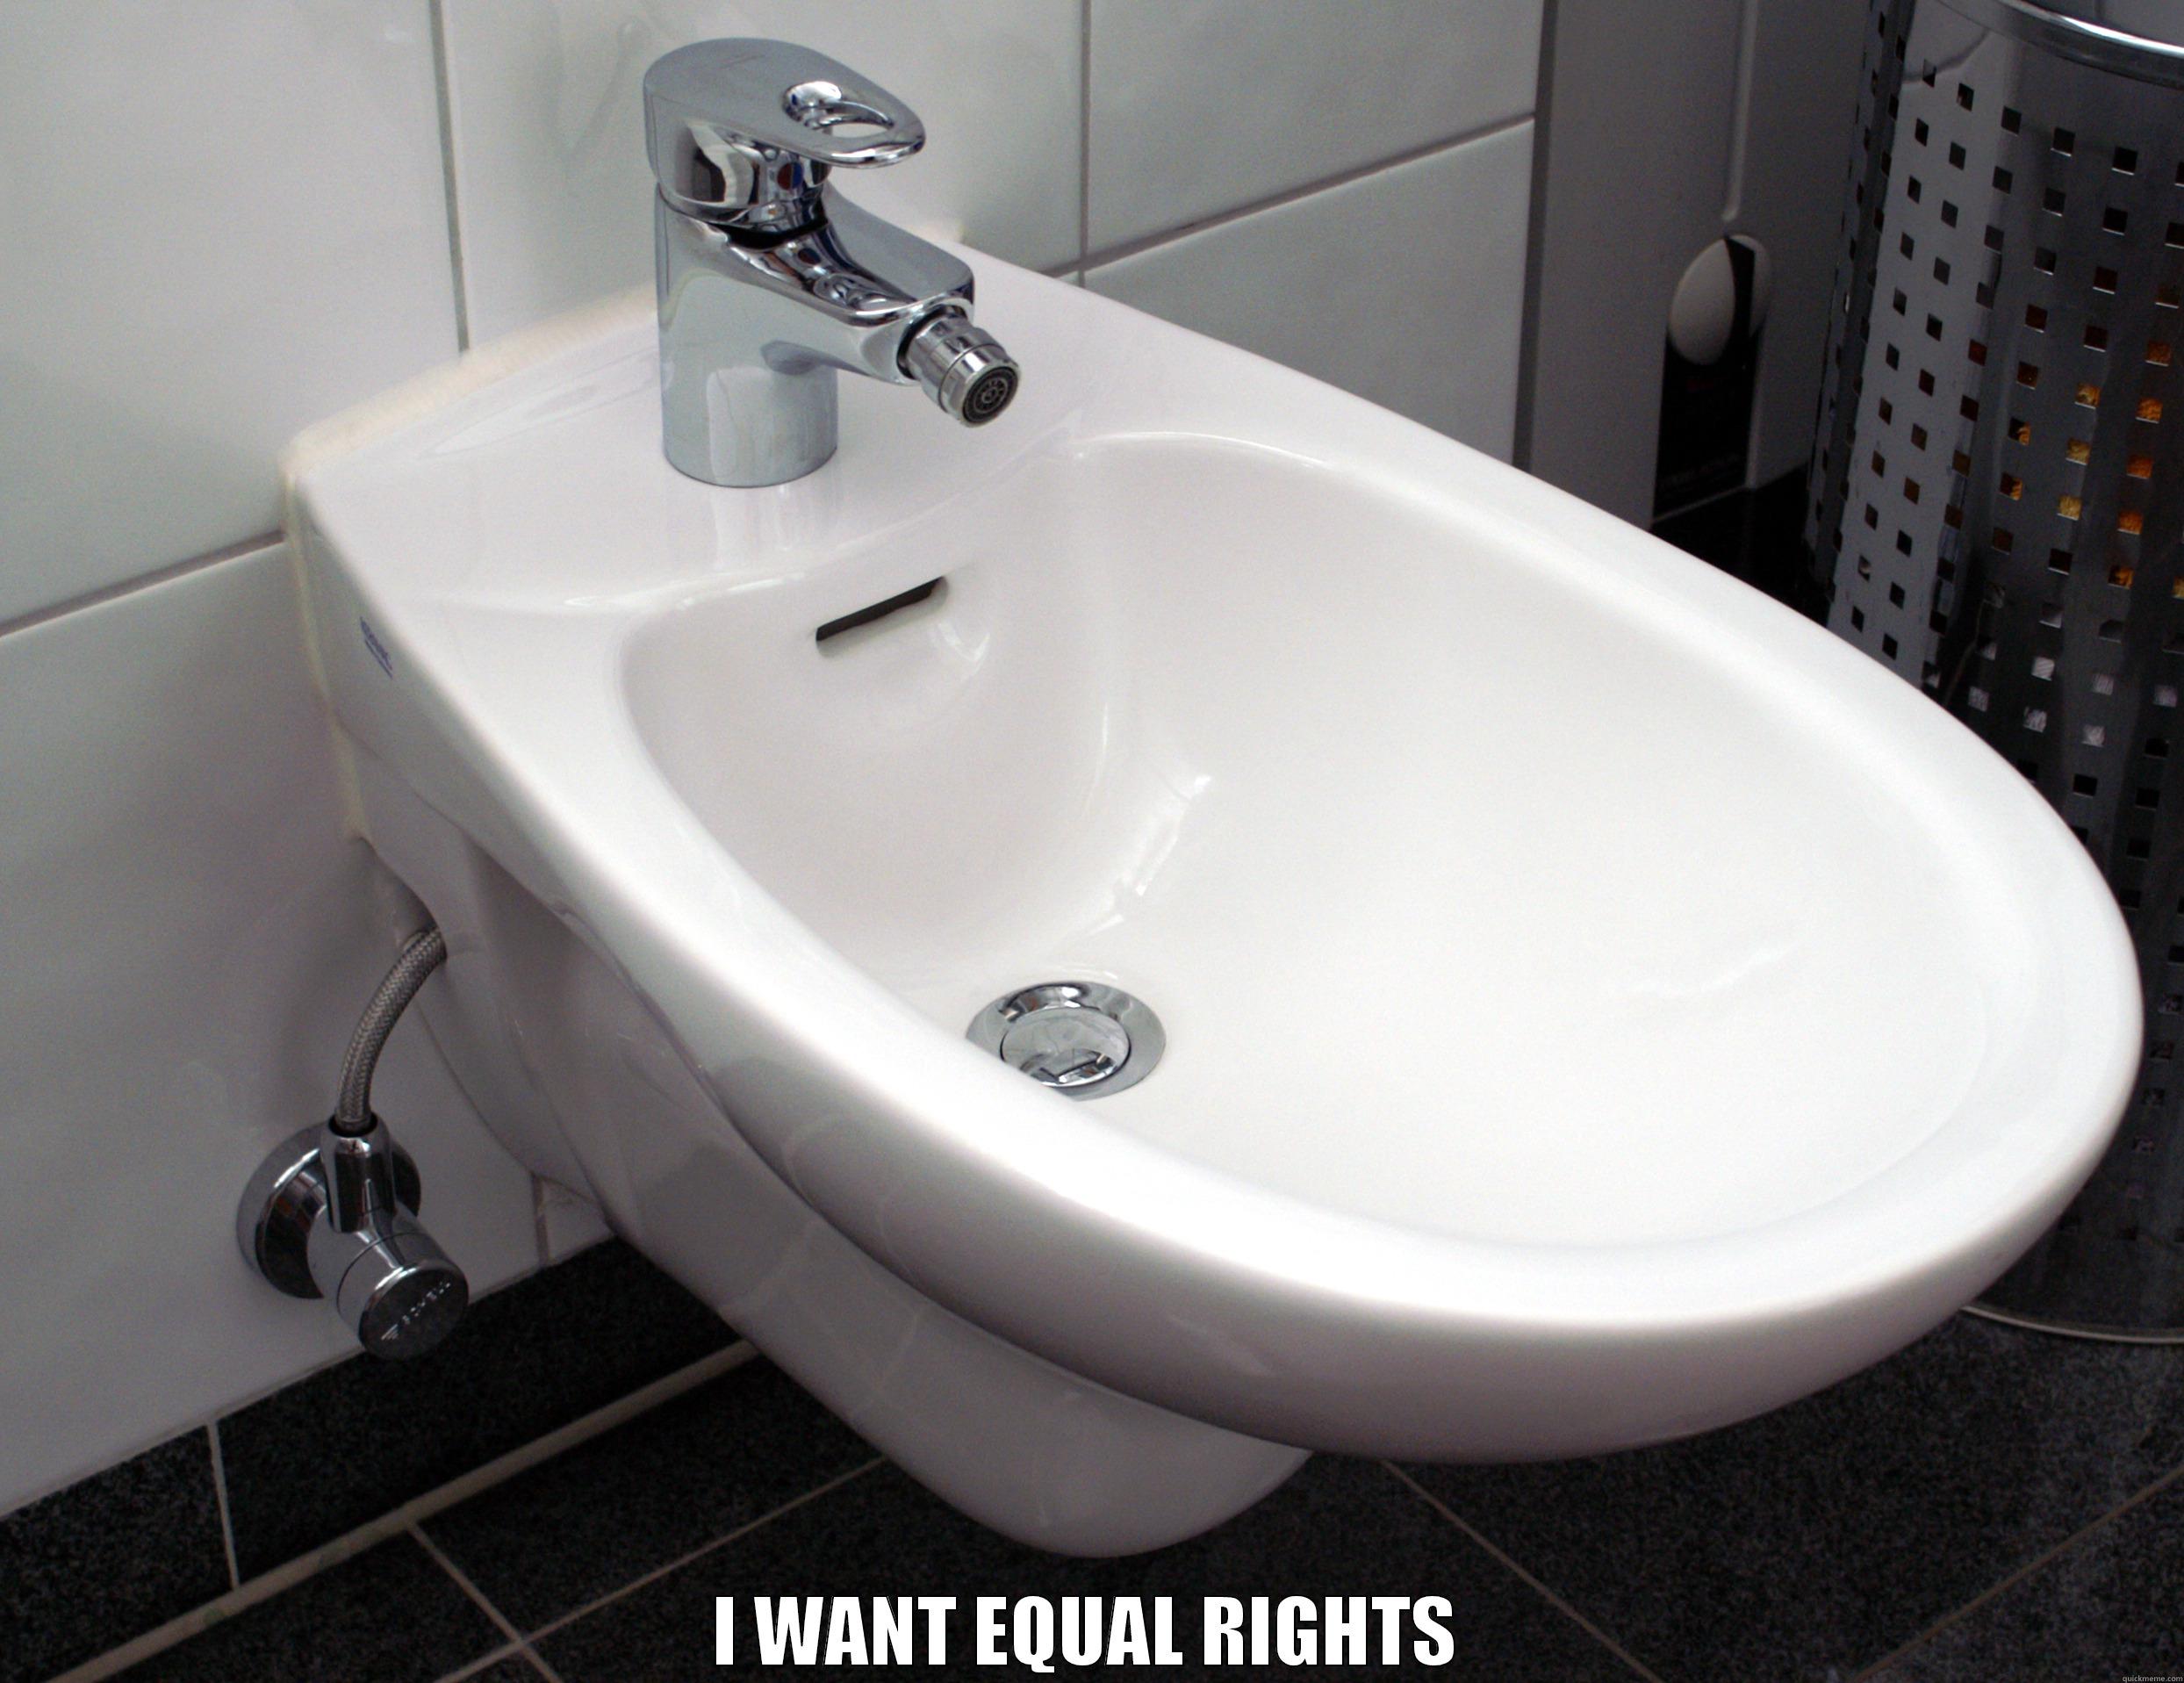  I WANT EQUAL RIGHTS Misc